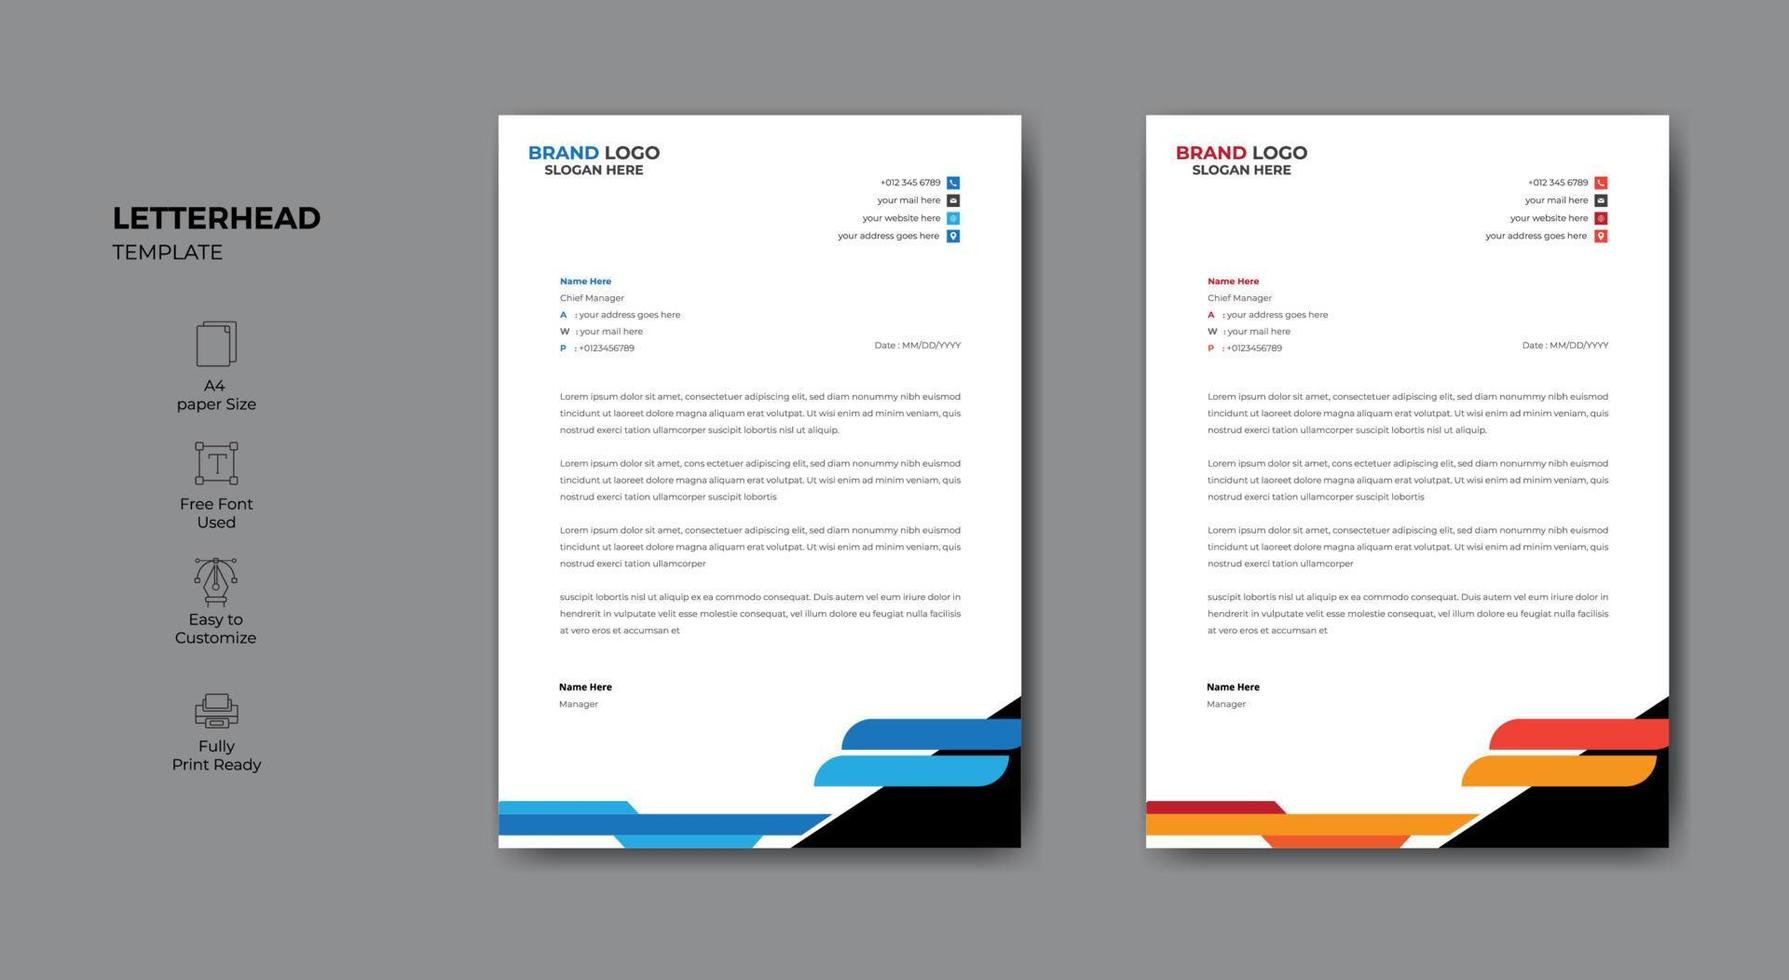 Minimalist style abstract letterhead template design for your business. Letterhead design for your business or project. vector